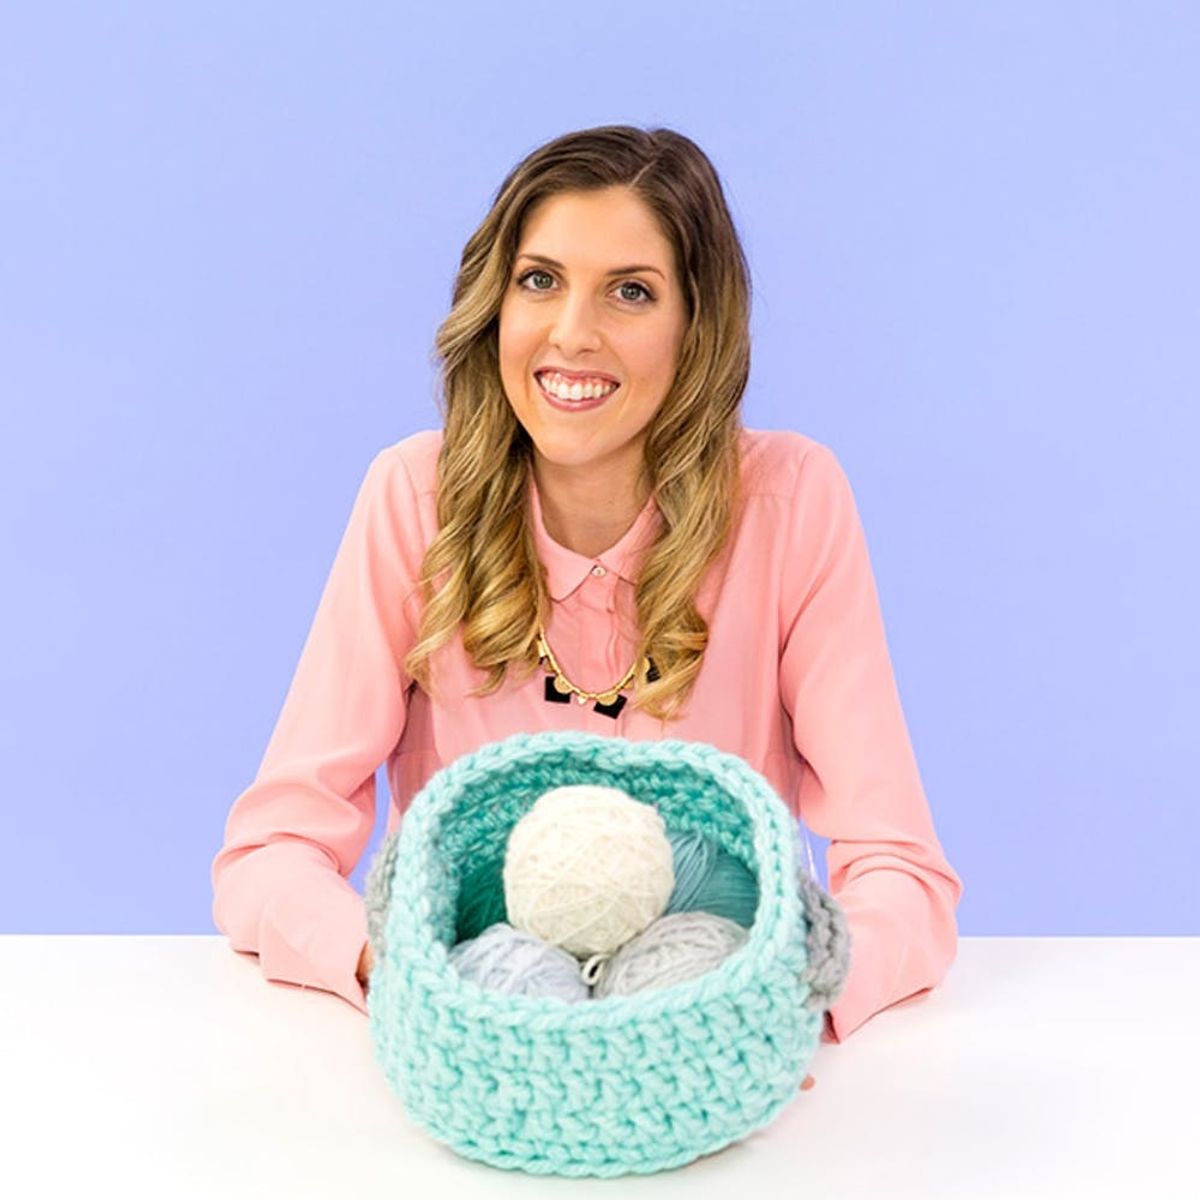 How to Transform a Ball of Yarn into a Decorative Basket